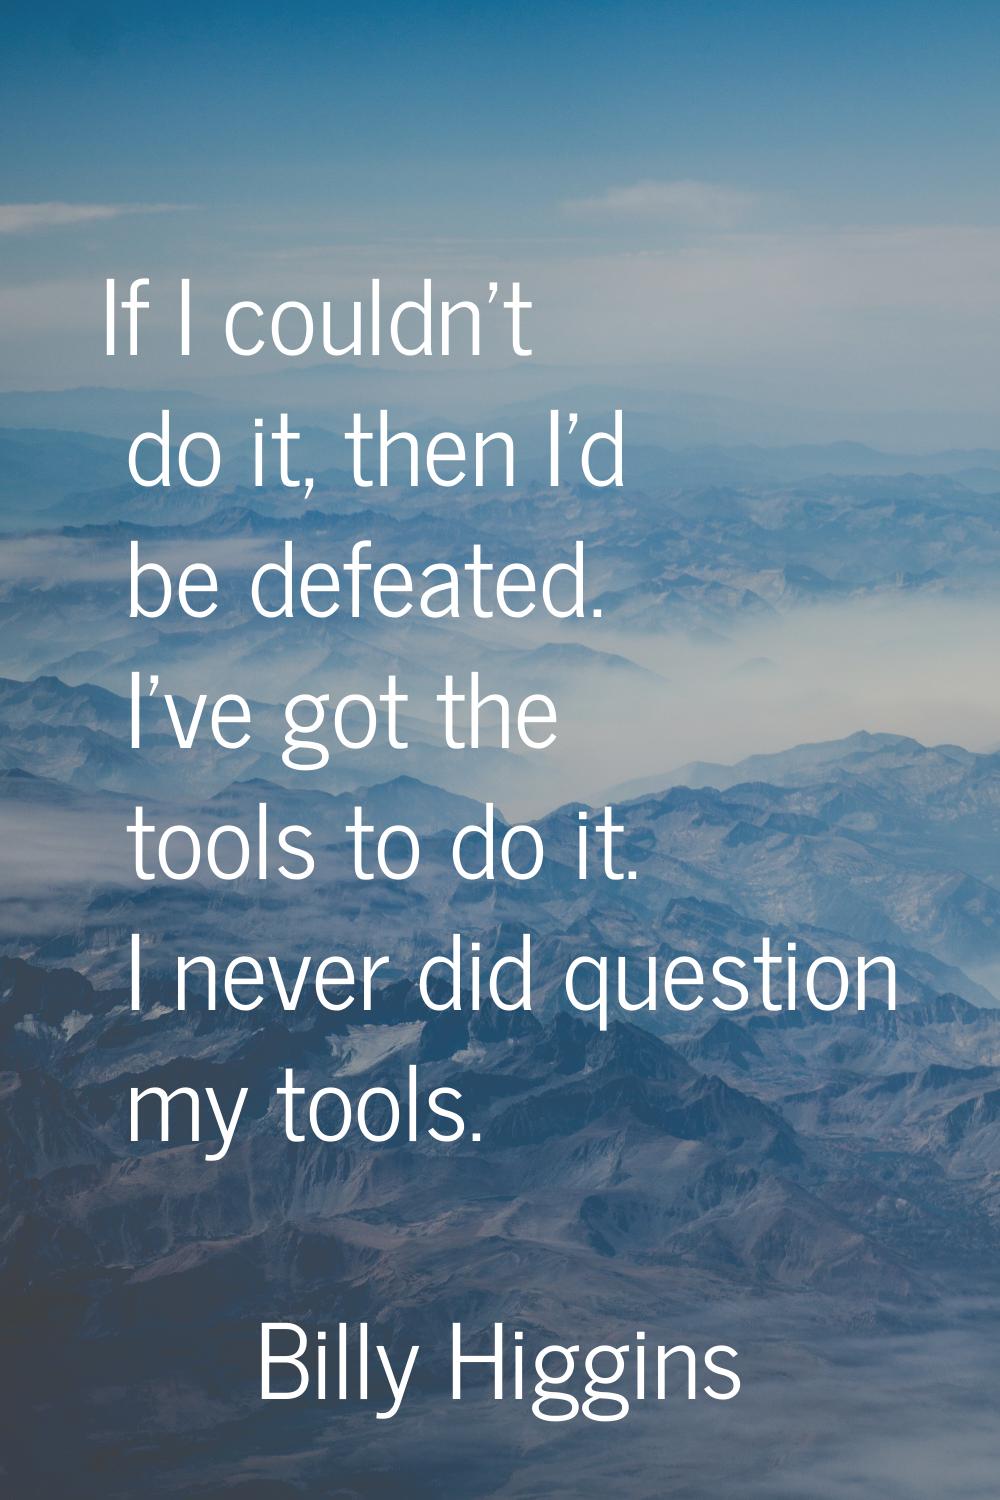 If I couldn't do it, then I'd be defeated. I've got the tools to do it. I never did question my too